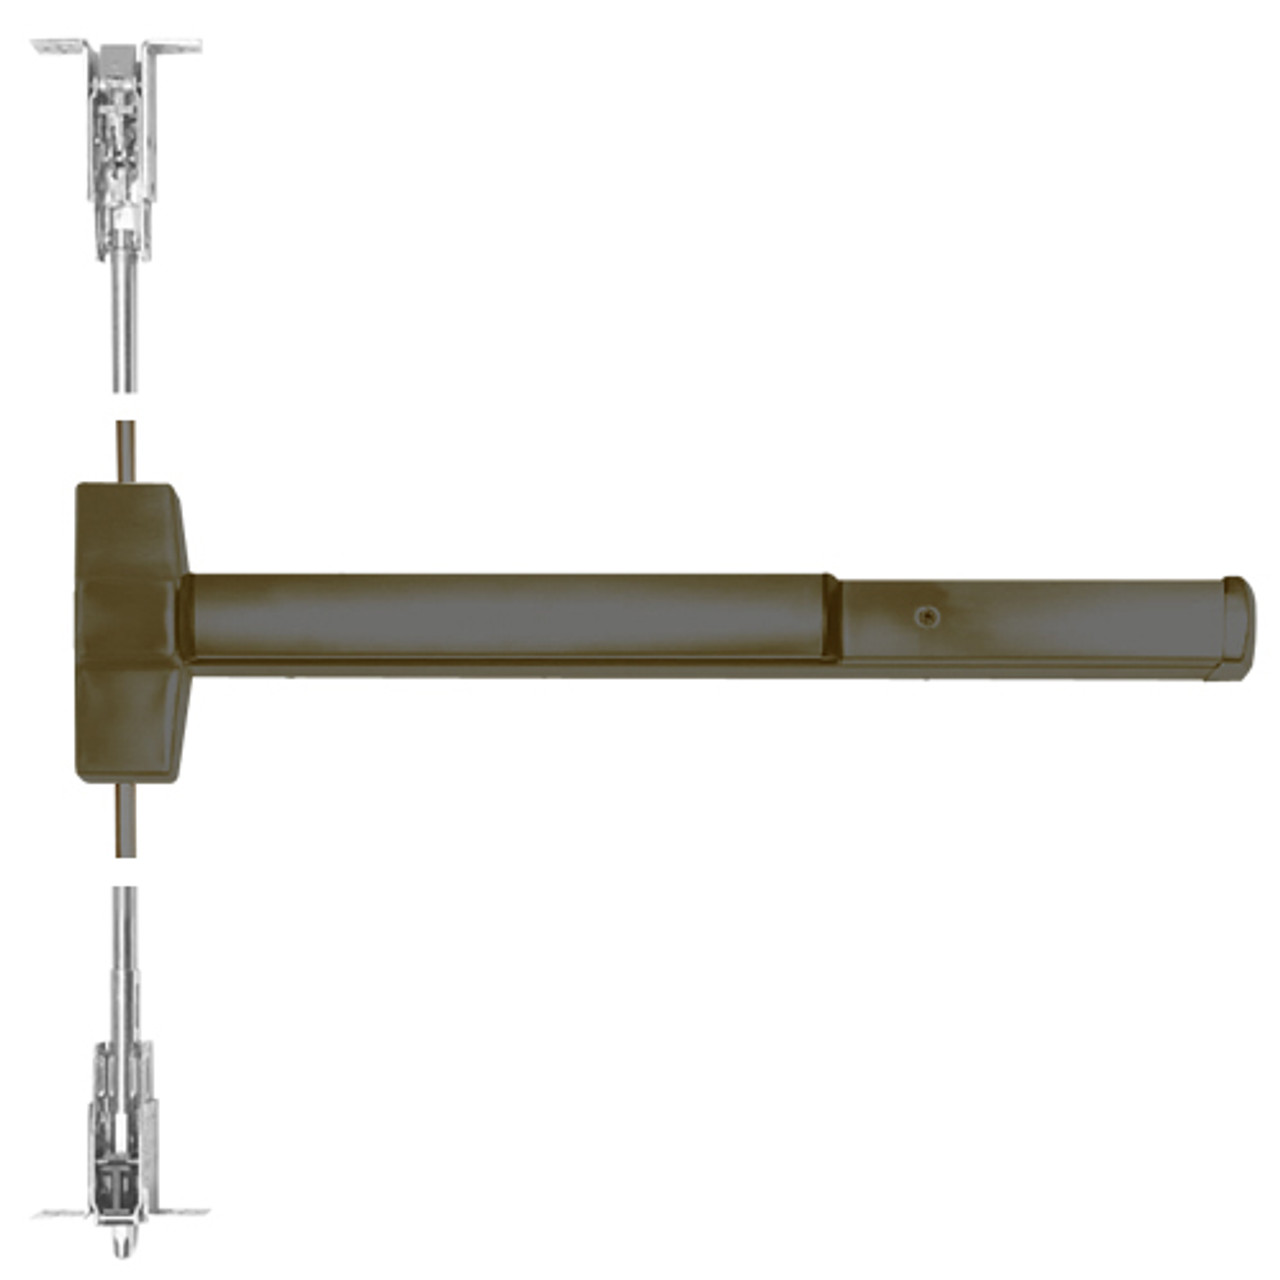 ED5800-613-W048-M61 Corbin ED5800 Series Non Fire Rated Concealed Vertical Rod Device with Exit Alarm Device in Oil Rubbed Bronze Finish